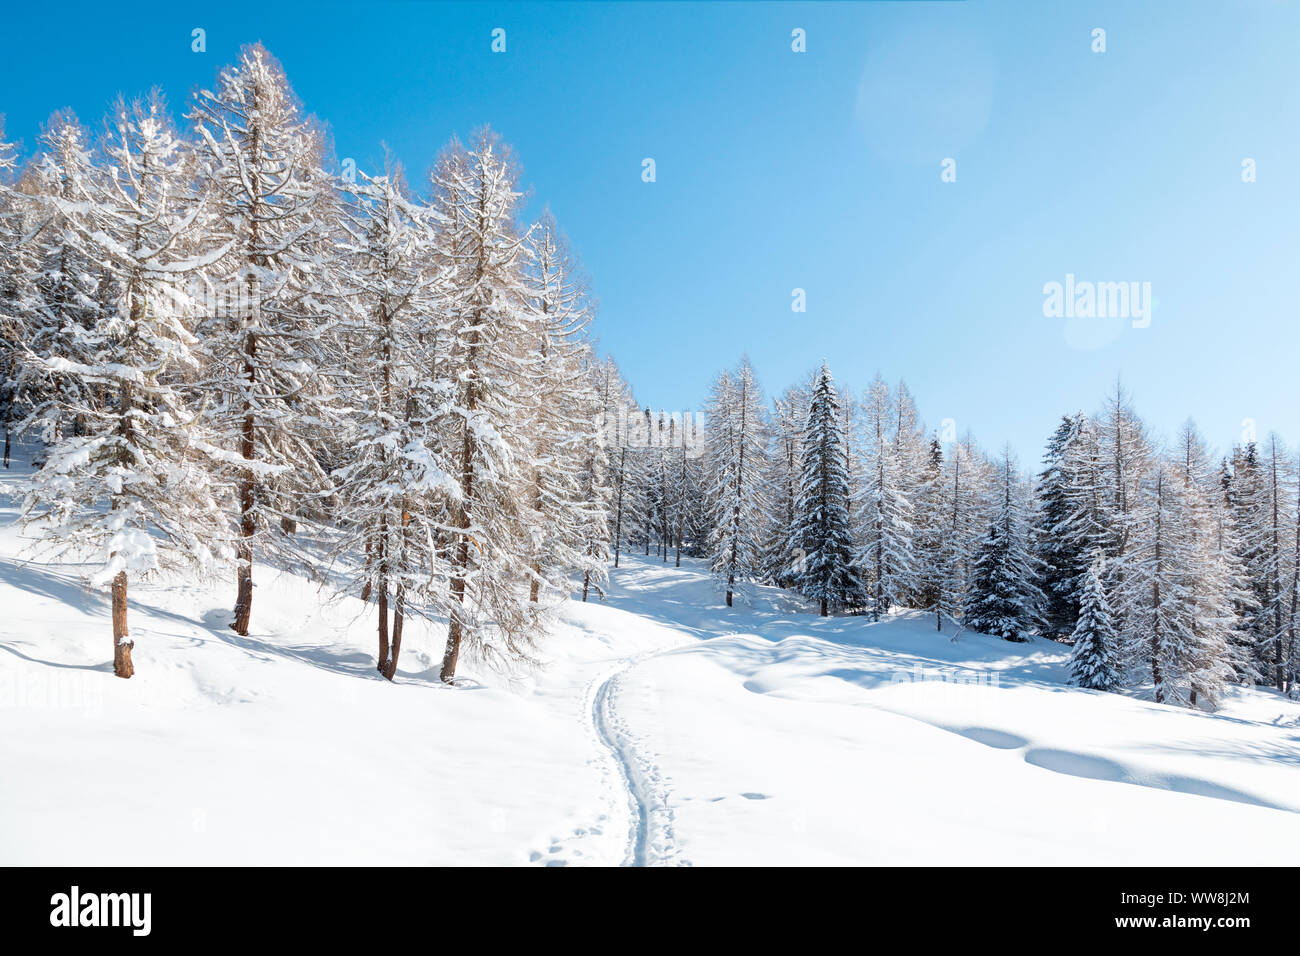 larch forest after a snowfall with track of ski mountaineers, Valfredda, Biois valley, Falcade, Belluno, Veneto, Italy Stock Photo